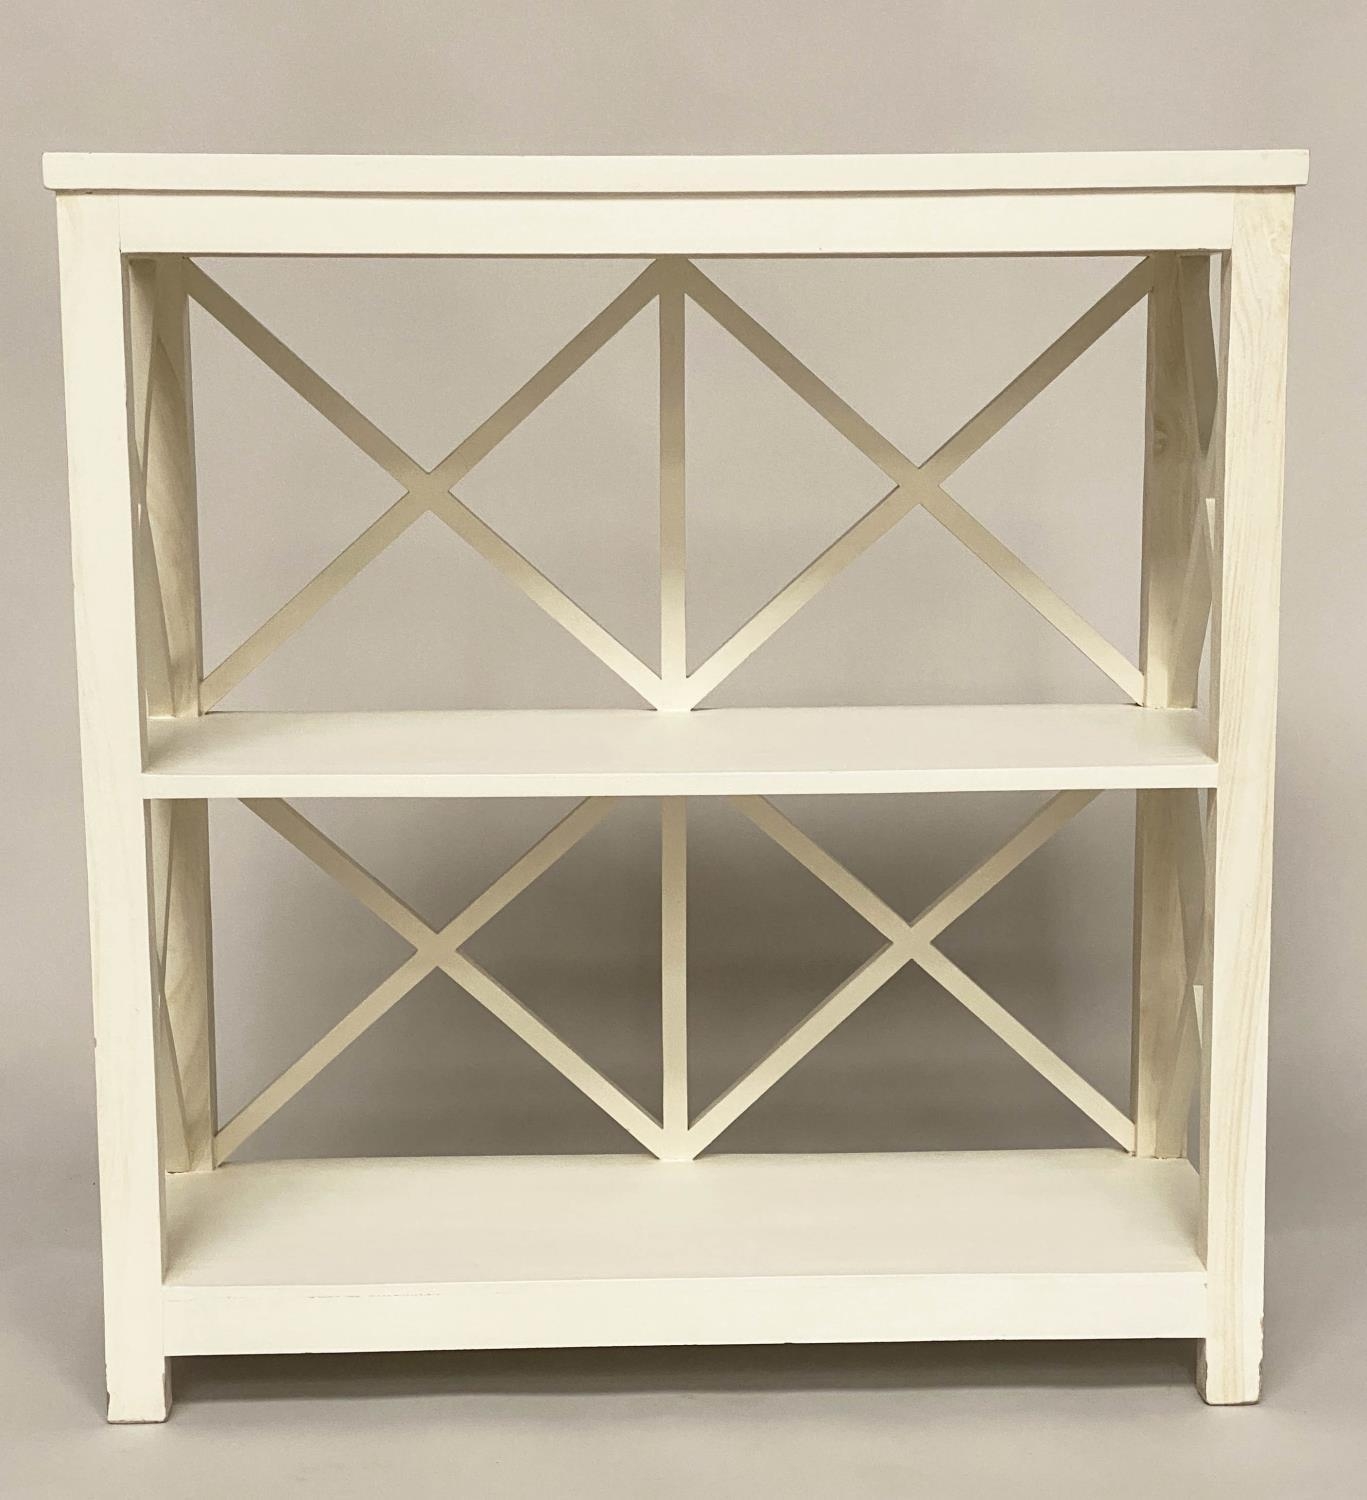 OPEN BOOKCASE, Oka style white painted with two shelves and lattice framework, 85cm W x 33cm D x